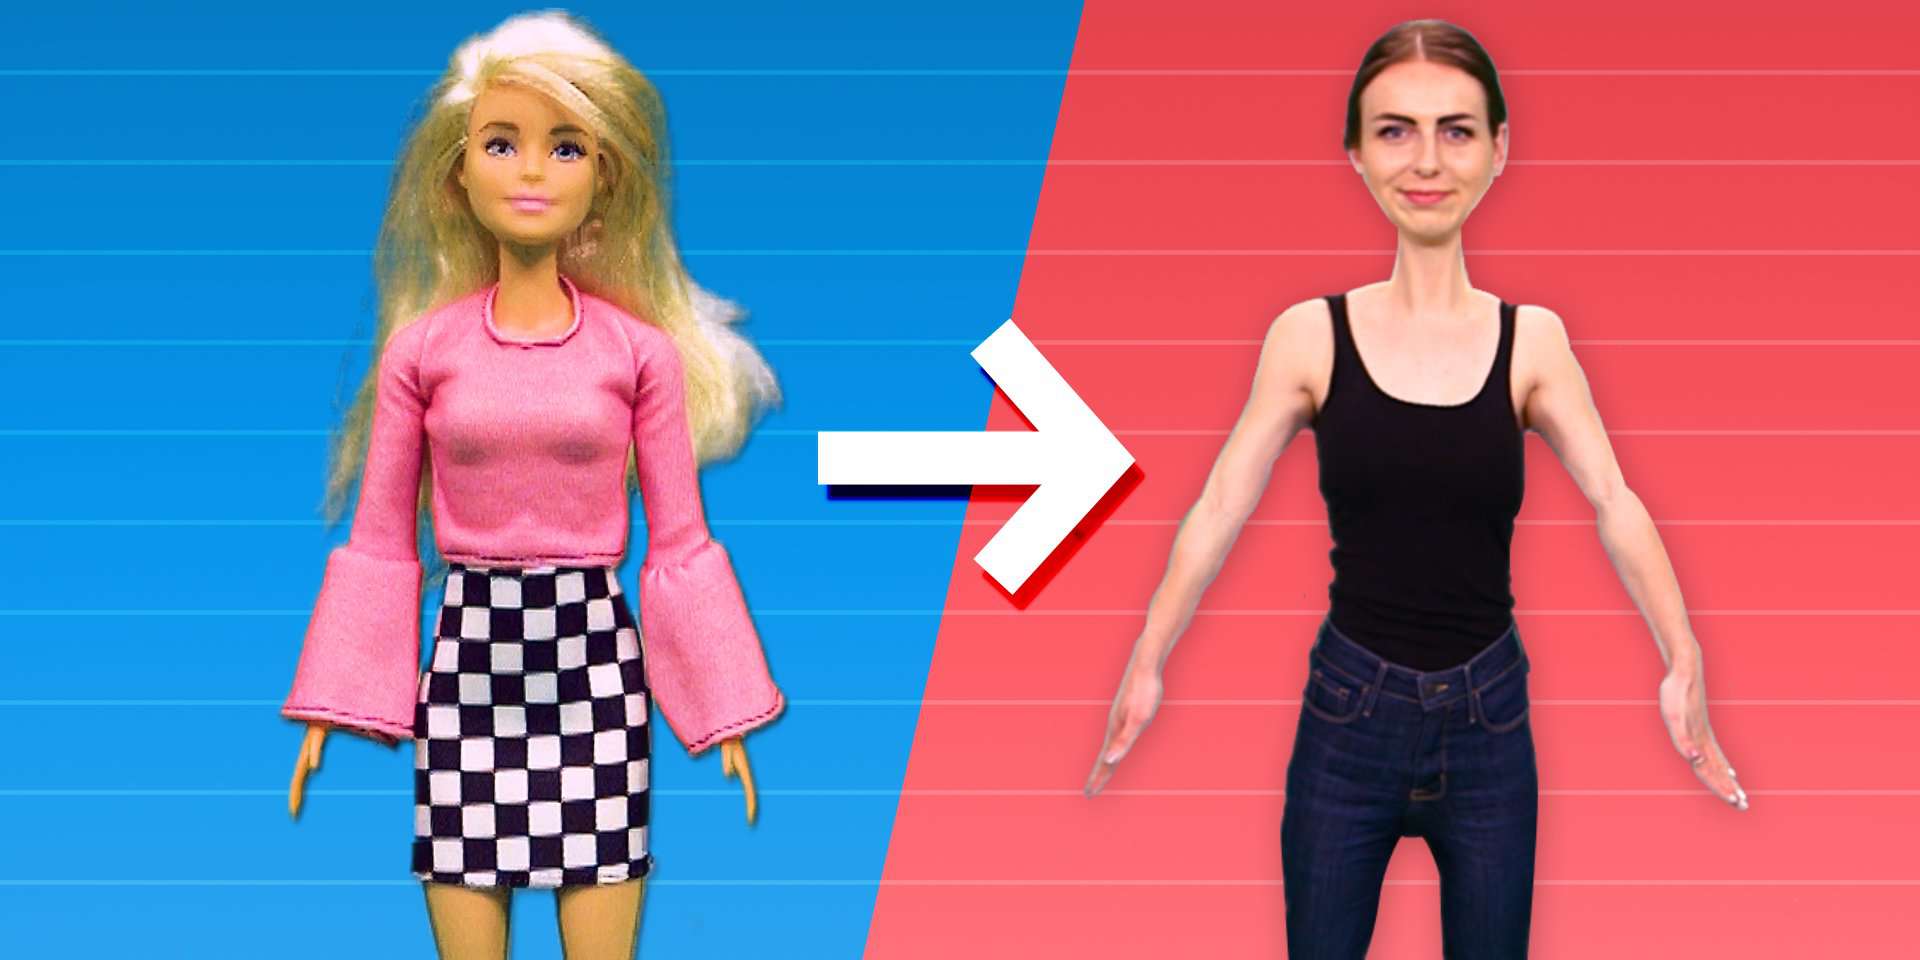 Taboola Ad Example 52765 - We Compared Our Bodies To Barbie. Here's What The Doll Would Look Like In Real Life.